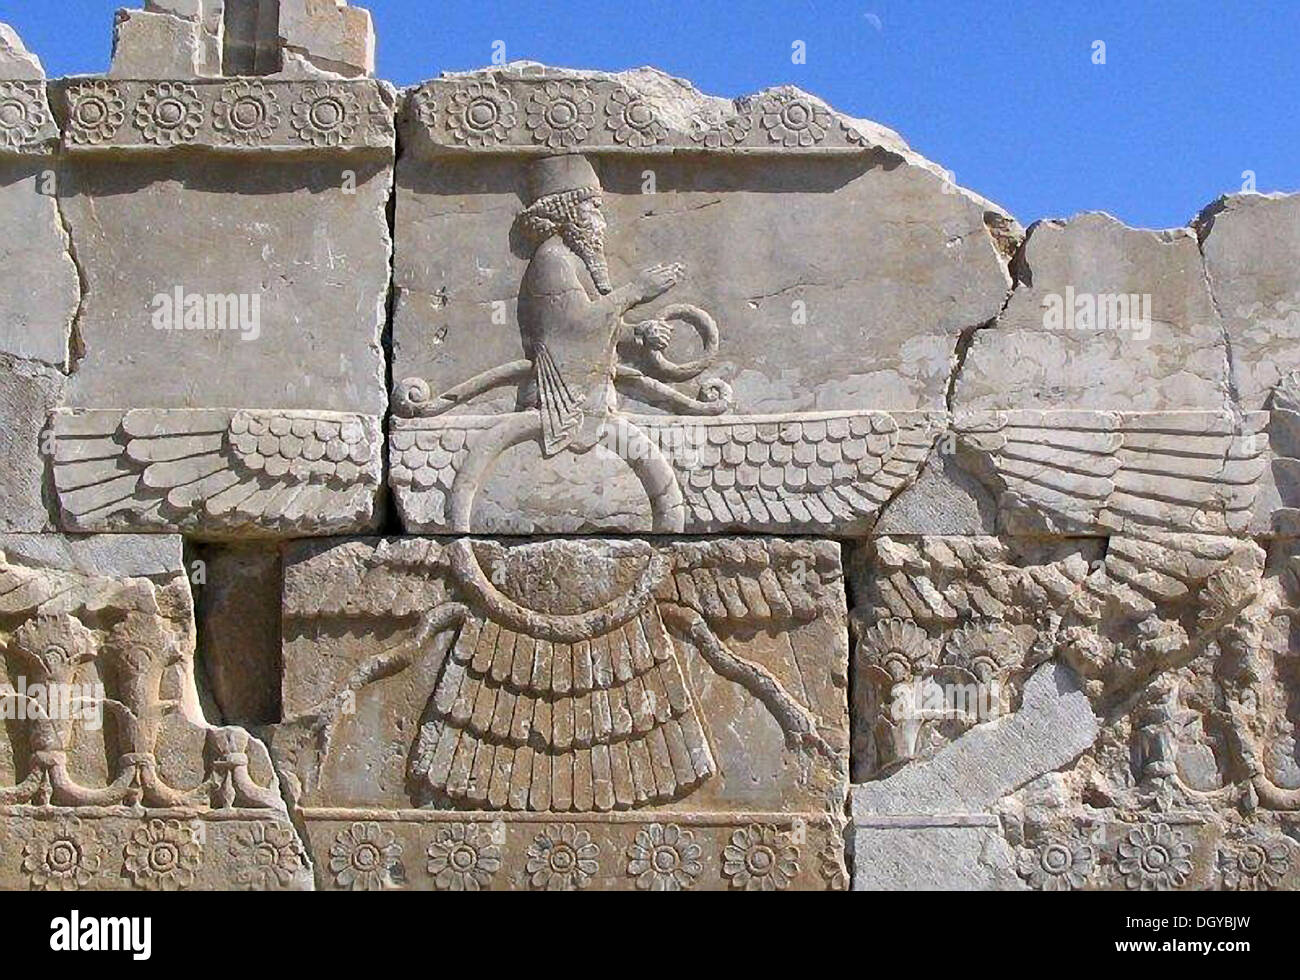 5719. The winged figure represents the God Ahuramazda in a winged disk, the symbol indicates that the authority of the king comes from God. Persepolis. King Darius’ palace, c. 6th. C. BC. Stock Photo